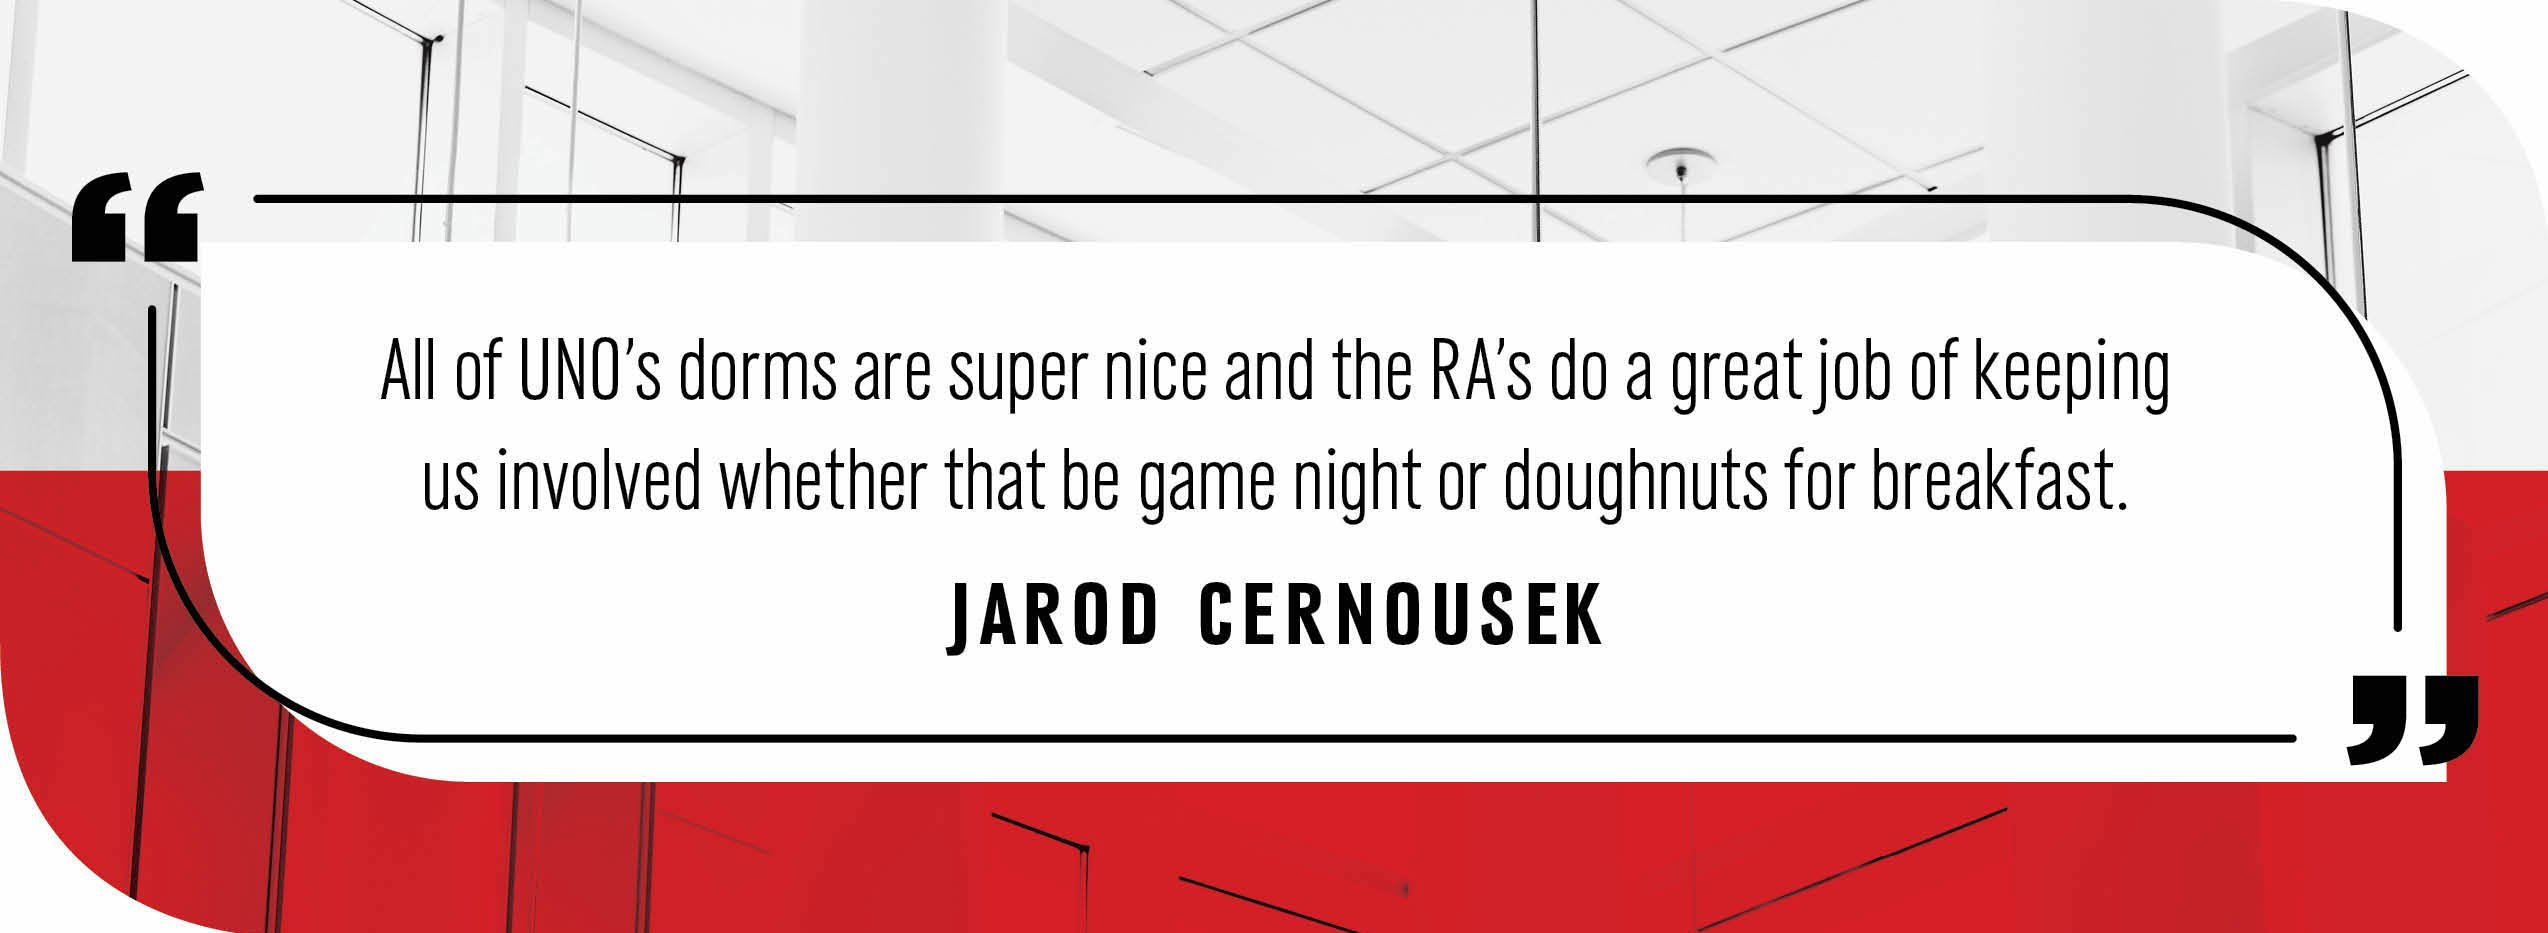 Quote by Jarod Cernousek: "All of UNO’s dorms are super nice and the RA’s do a great job of keeping us involved whether that be game night or doughnuts for breakfast."